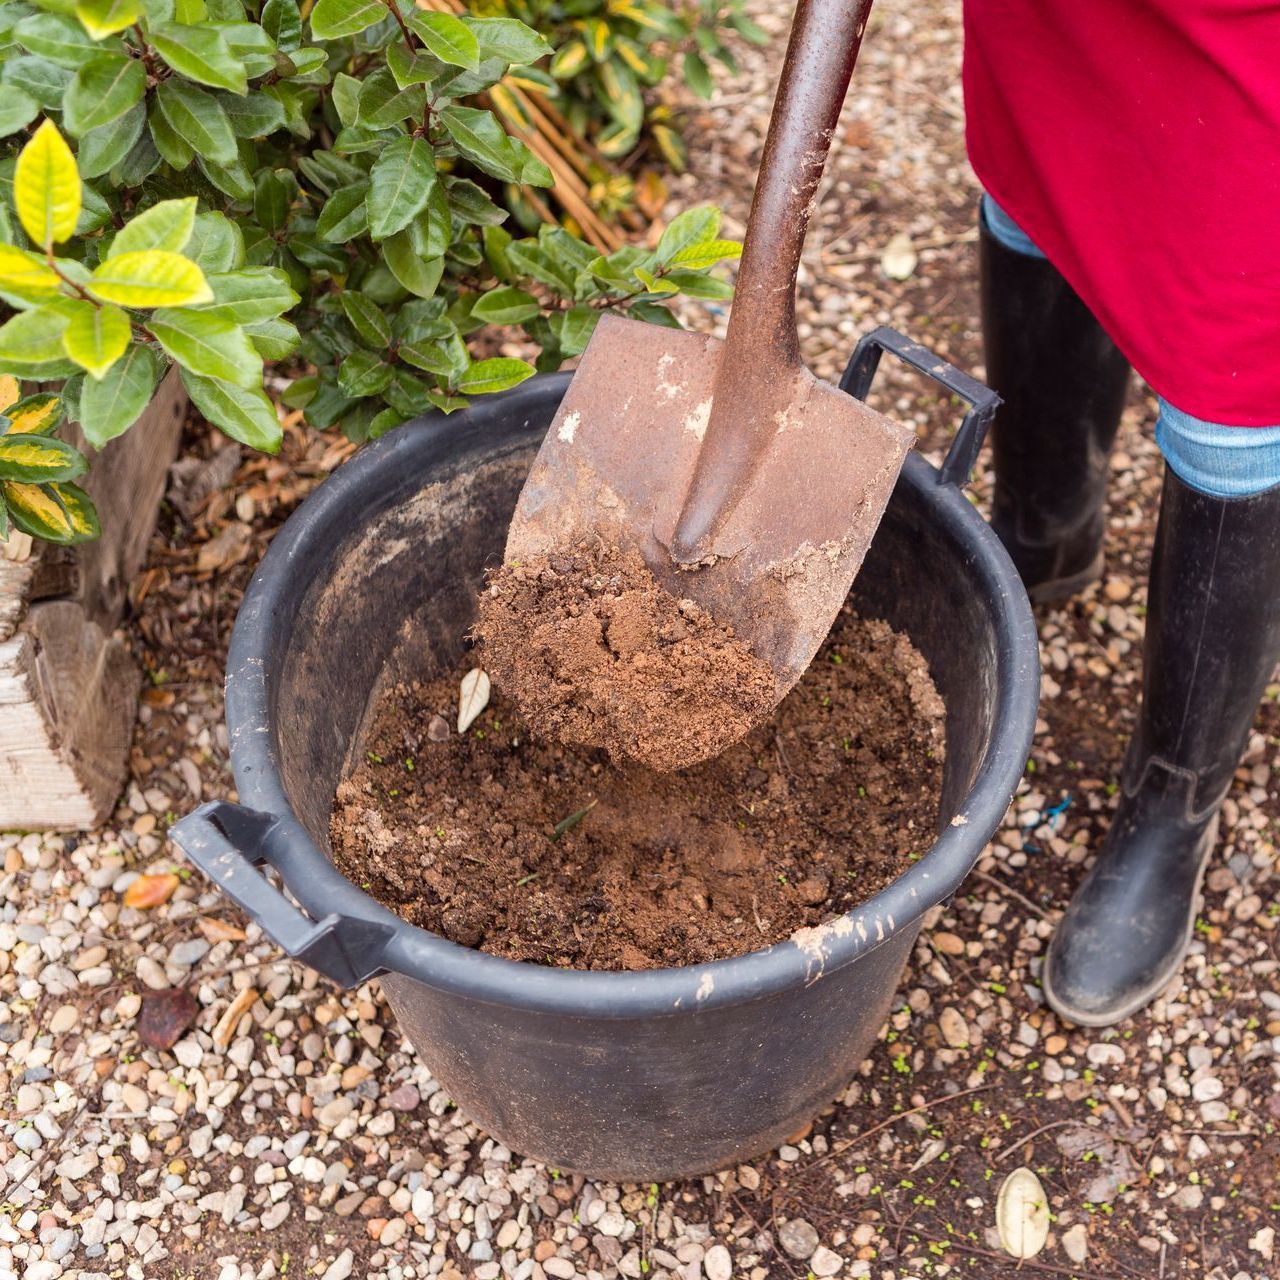 a person is digging in a bucket of dirt with a shovel .